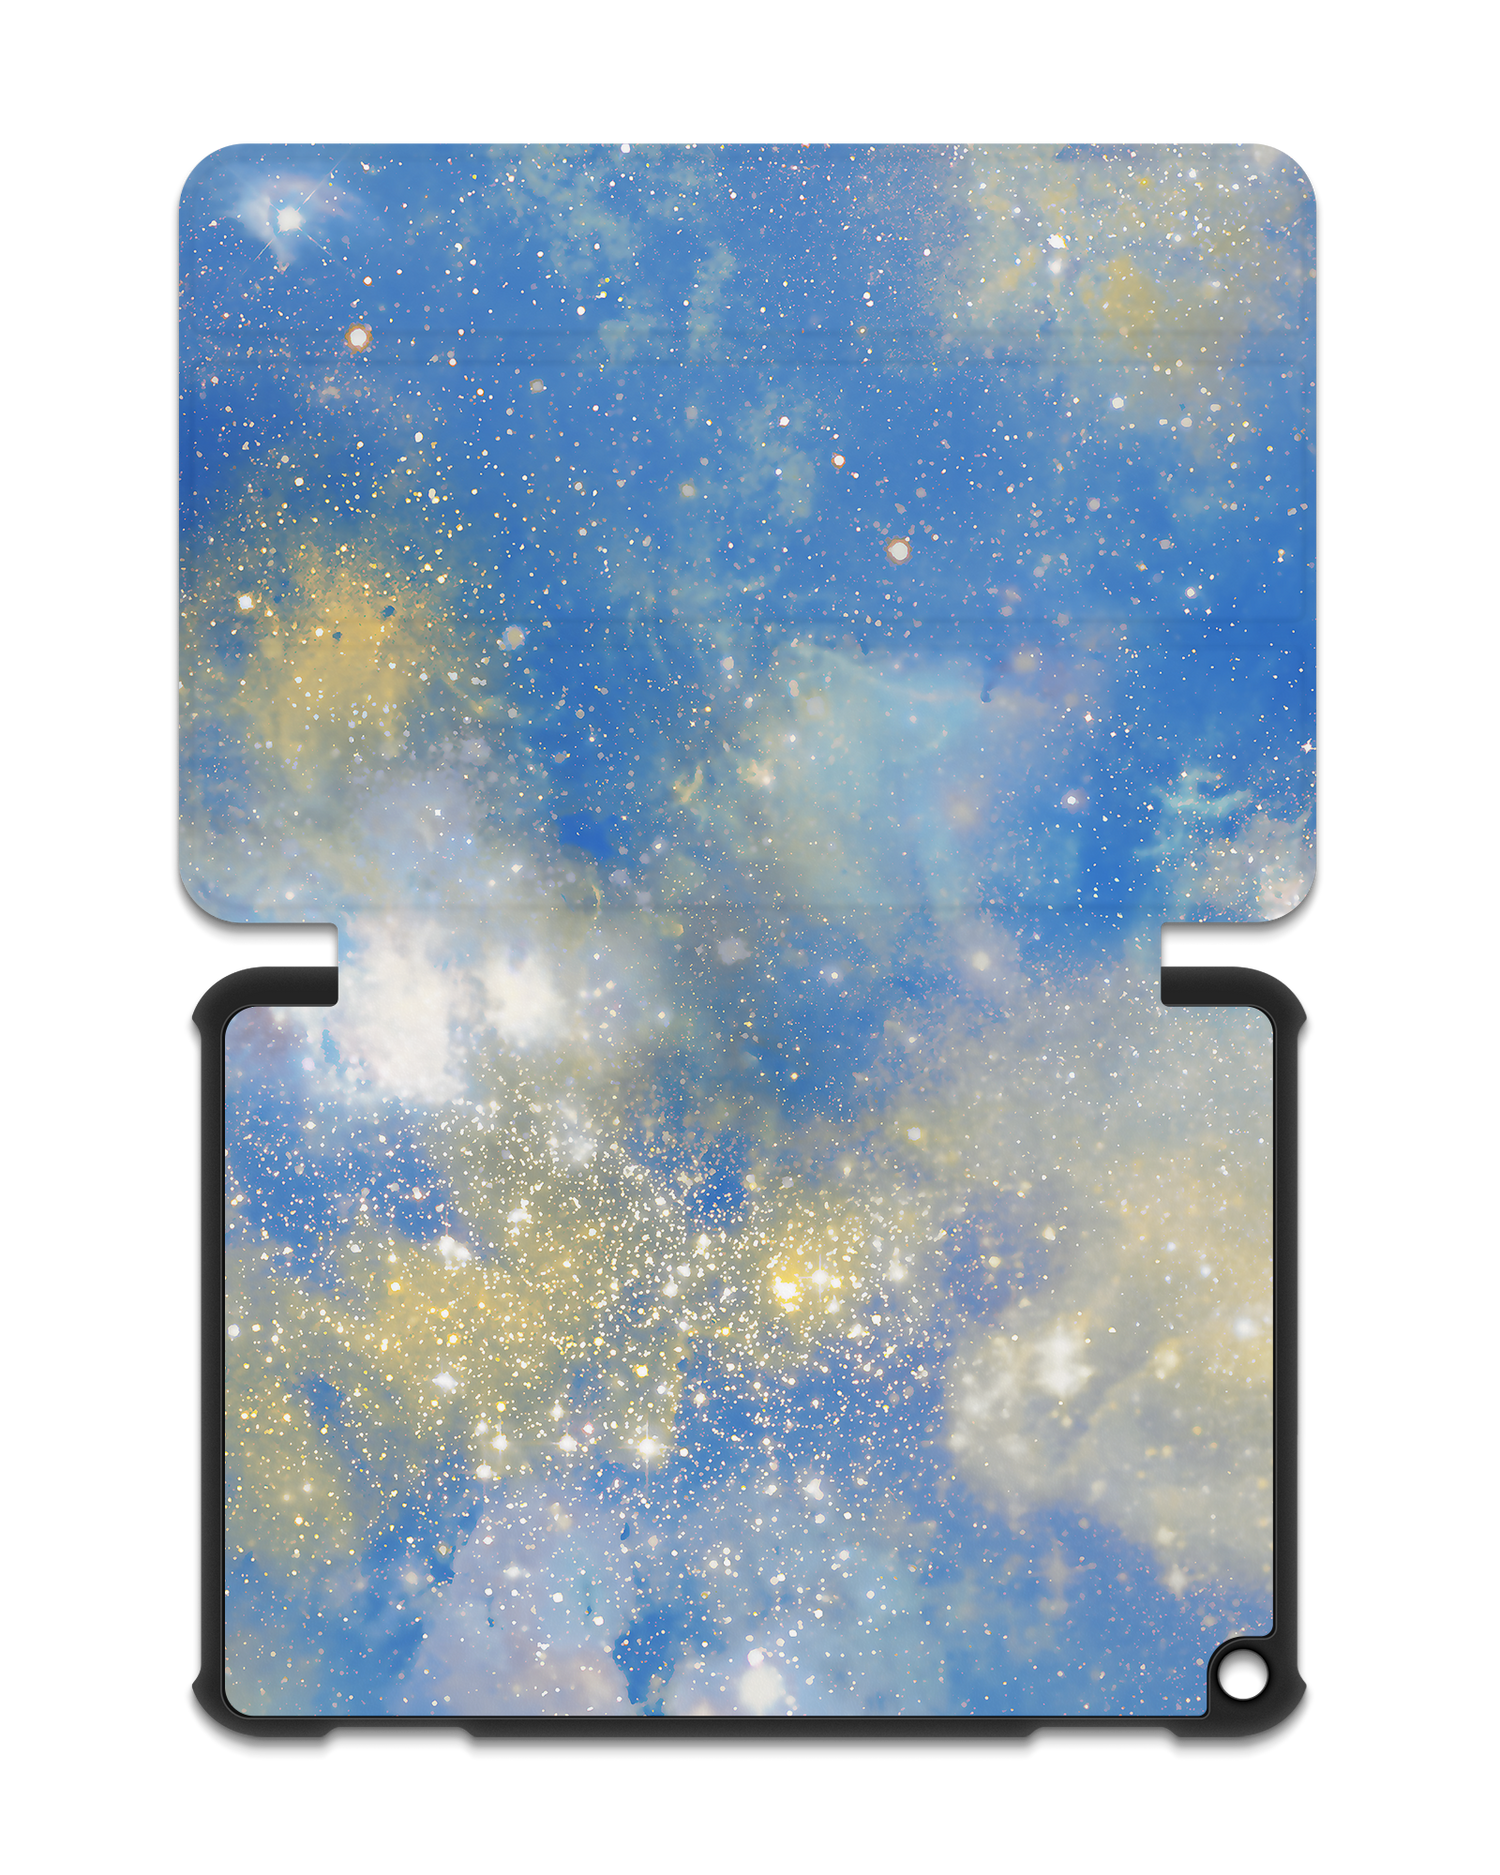 Spaced Out Tablet Smart Case for Amazon Fire HD 8 (2022), Amazon Fire HD 8 Plus (2022), Amazon Fire HD 8 (2020), Amazon Fire HD 8 Plus (2020): Opened